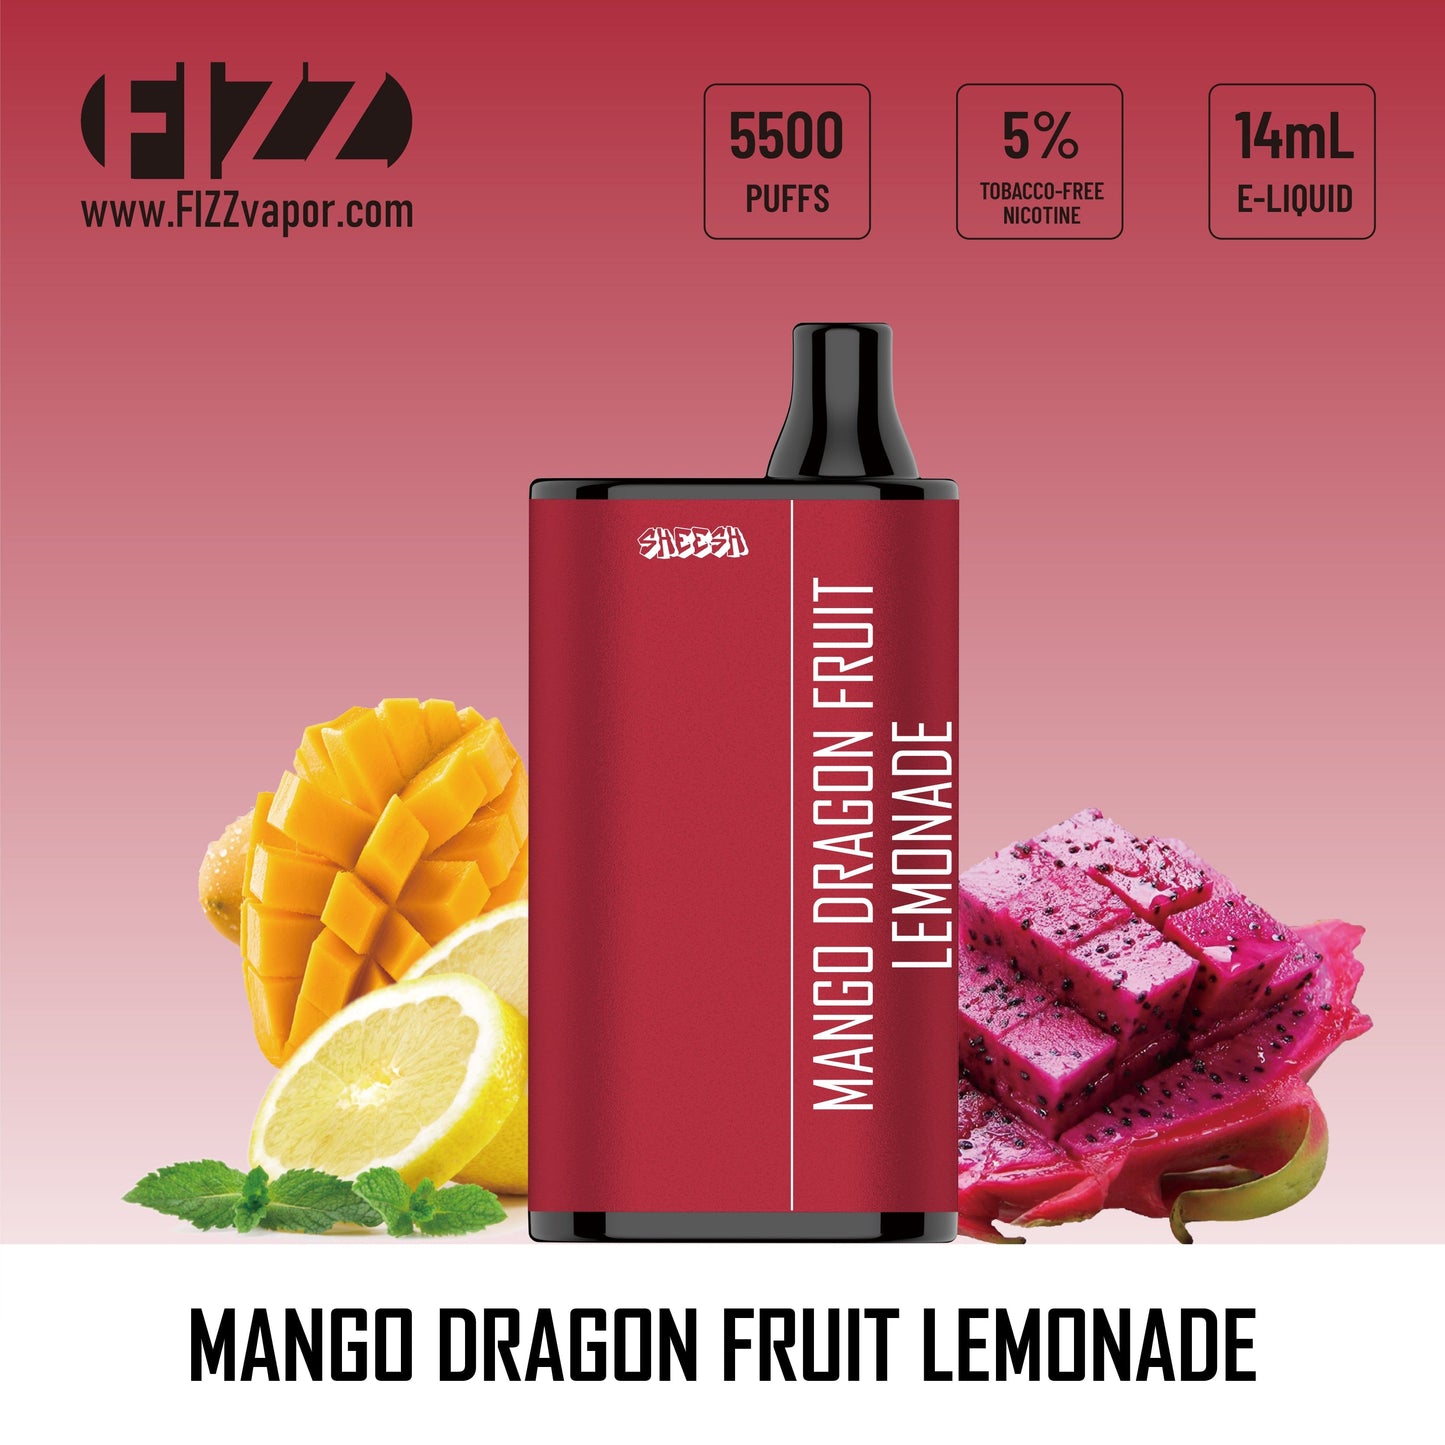 Try Dragon Fruit Lemonade Hyde Your Taste Buds Will Thank You